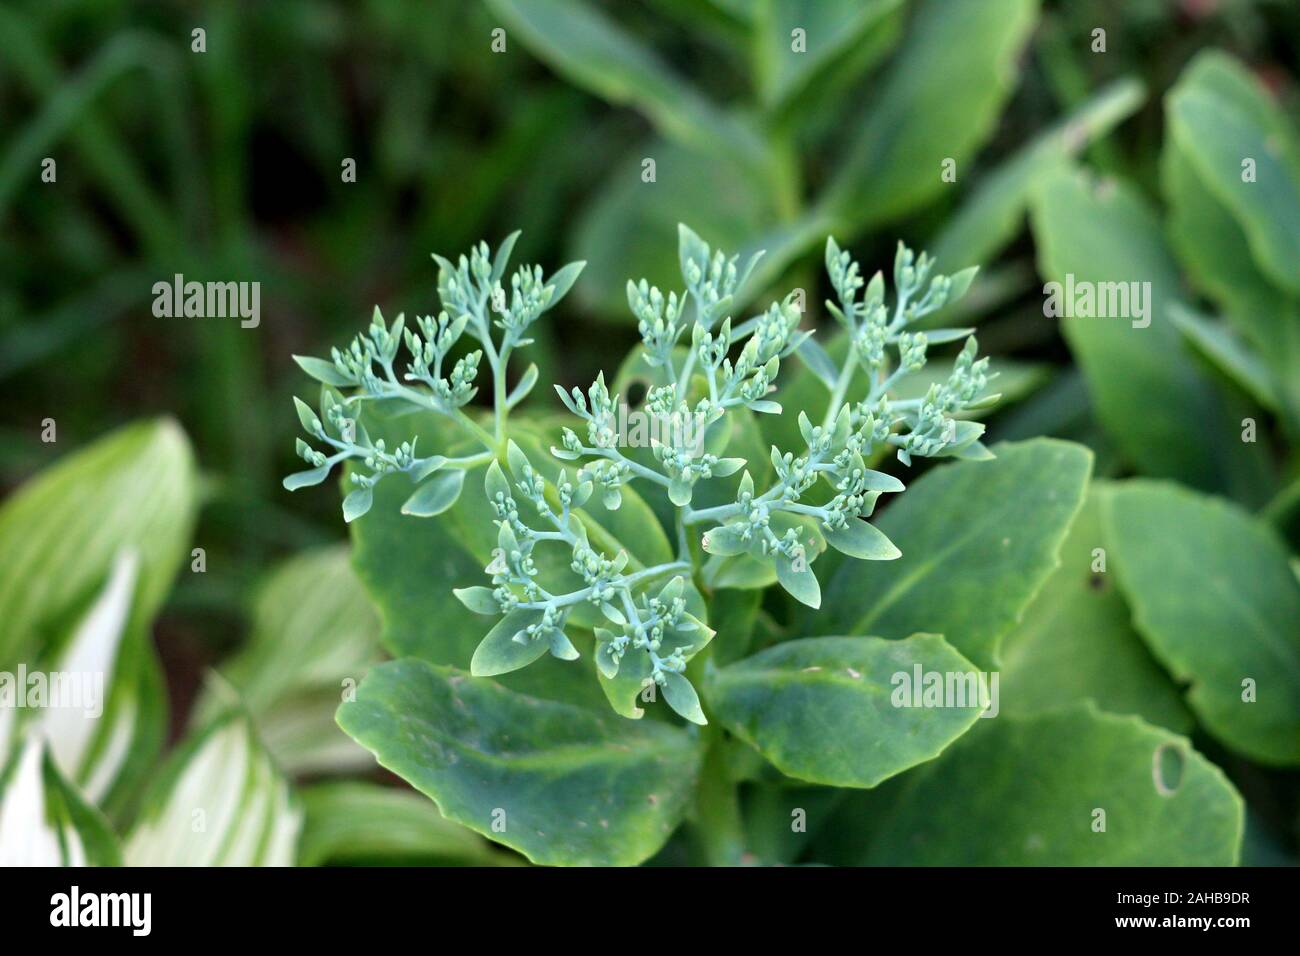 Sedum or Stonecrop hardy succulent ground cover perennial plant with cluster of closed dark green flower buds surrounded with thick leaves Stock Photo